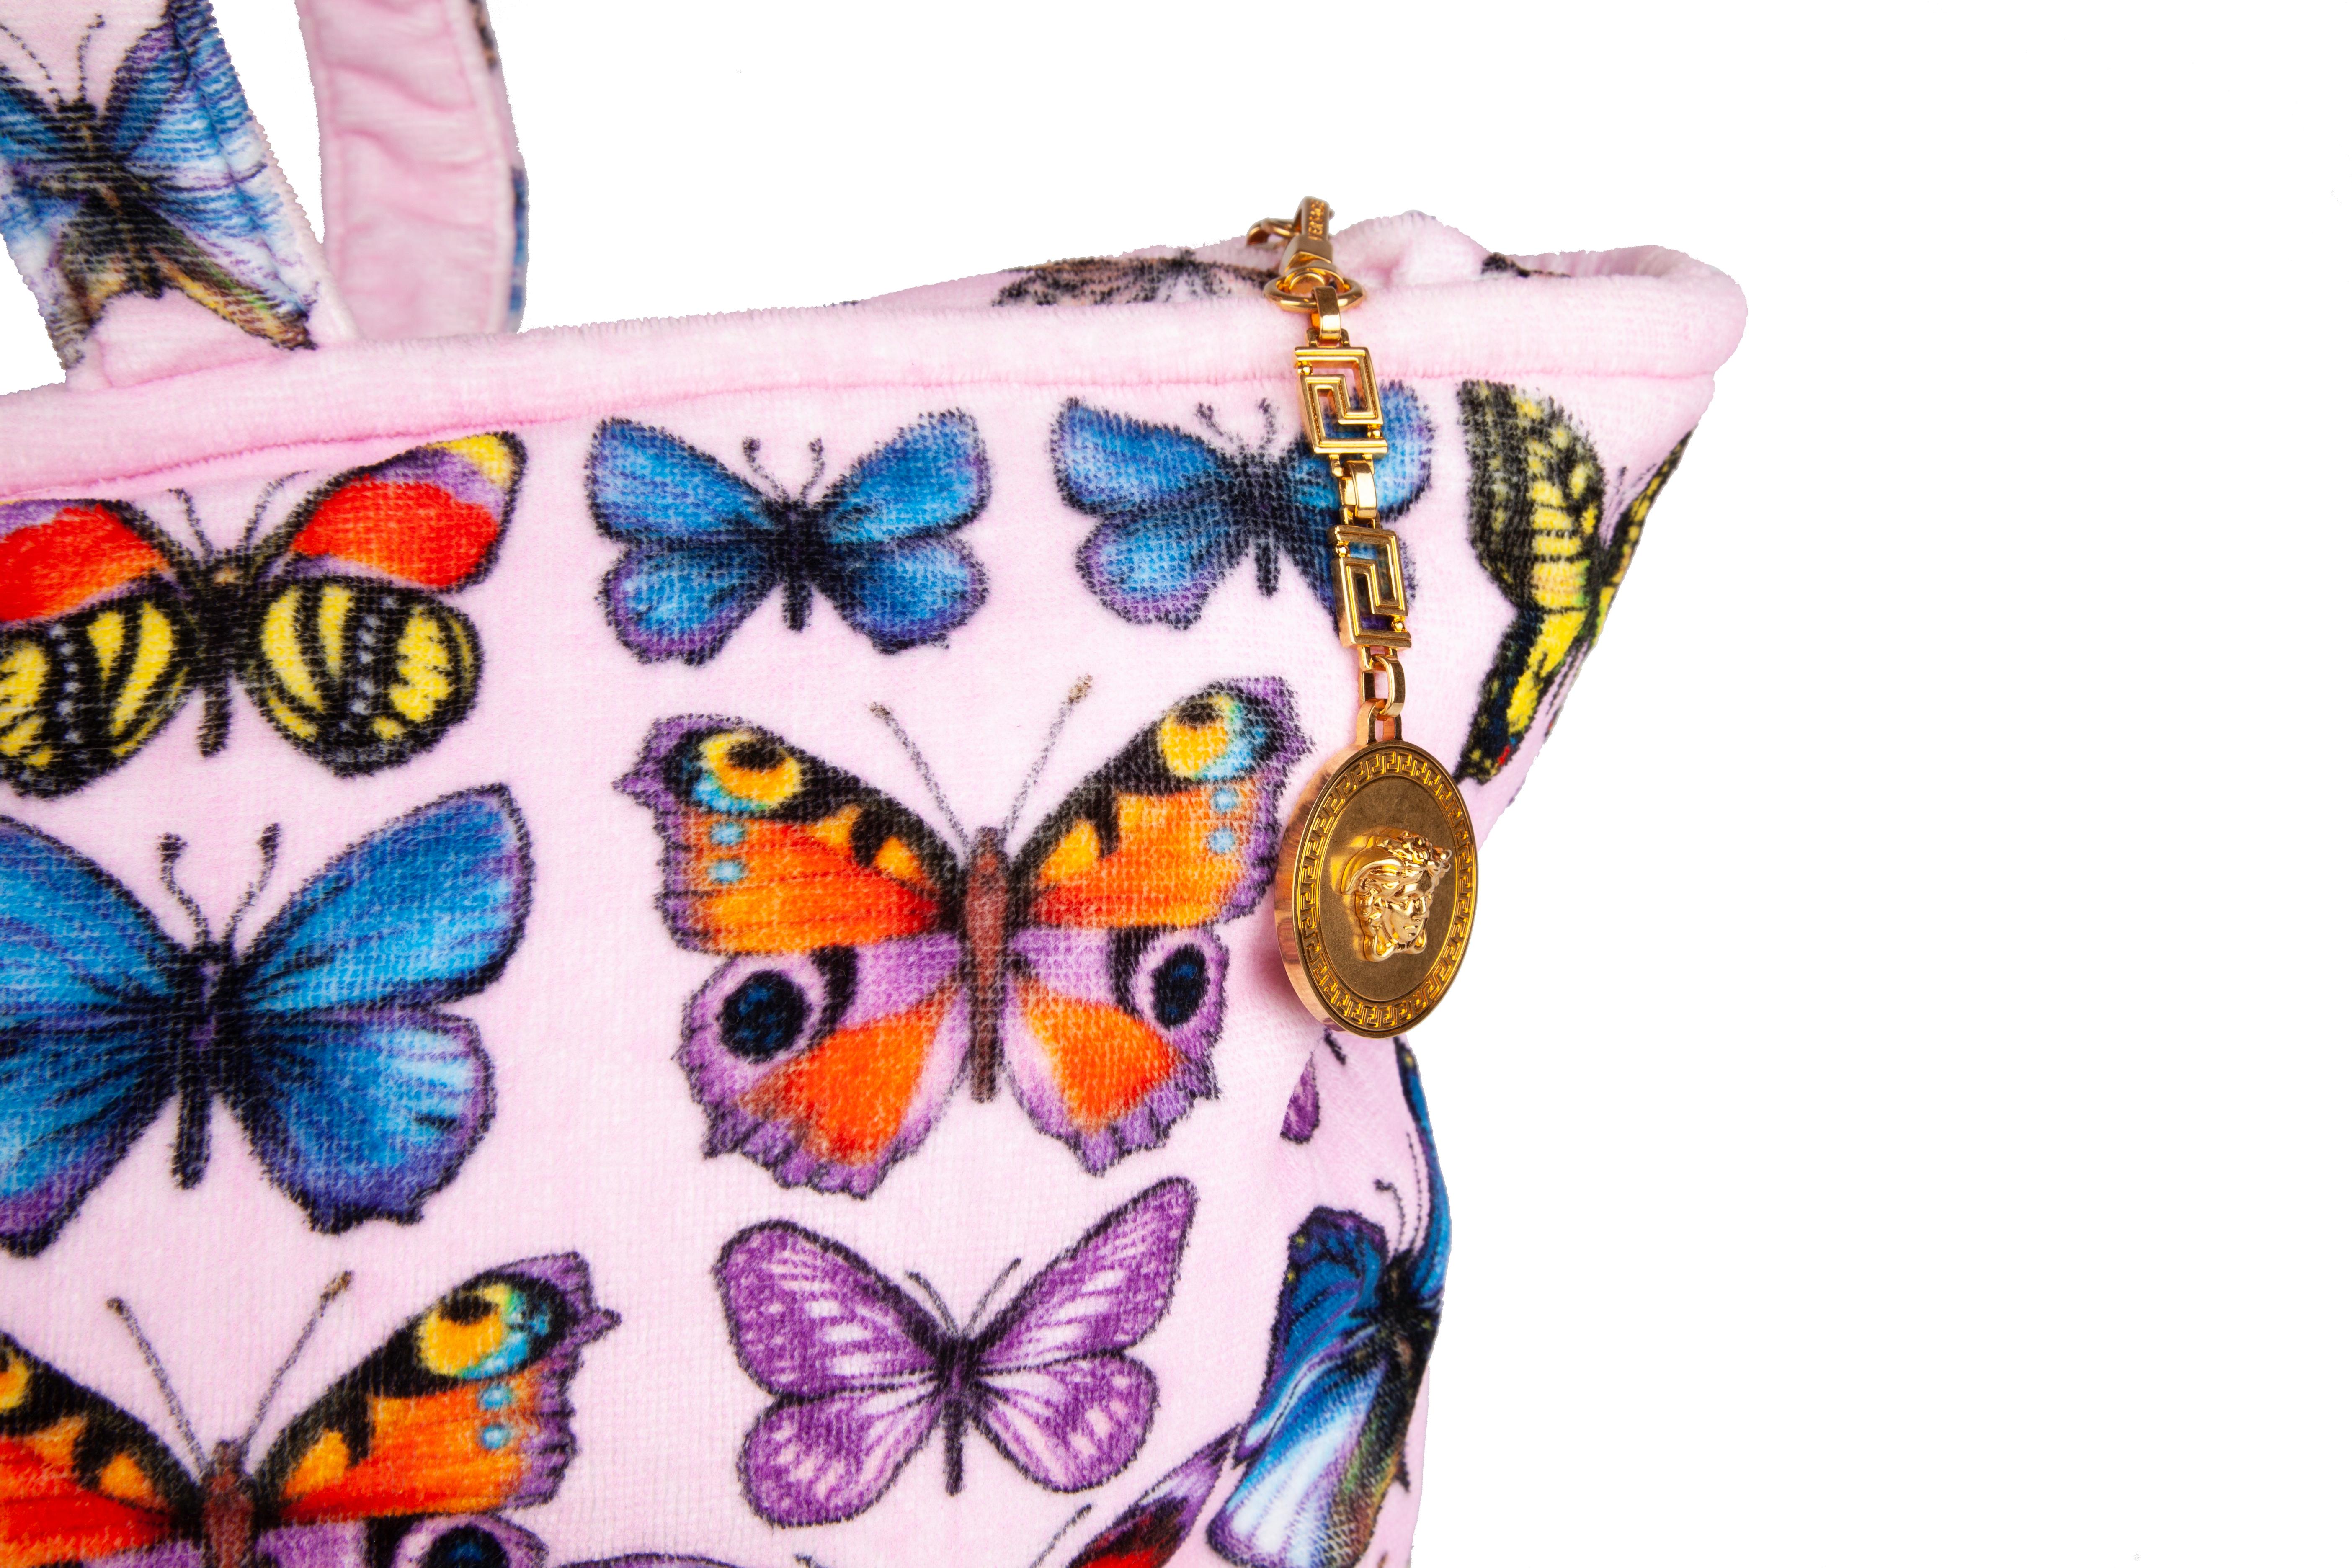 Versace Spring 2018 Runway Tribute Collection Butterfly Print Terry Cloth Tote

For Spring 2018, Donatella Versace assembled a beautiful tribute to her late brother, Gianni Versace, on the runway. This tribute collection was an ode to Gianni's